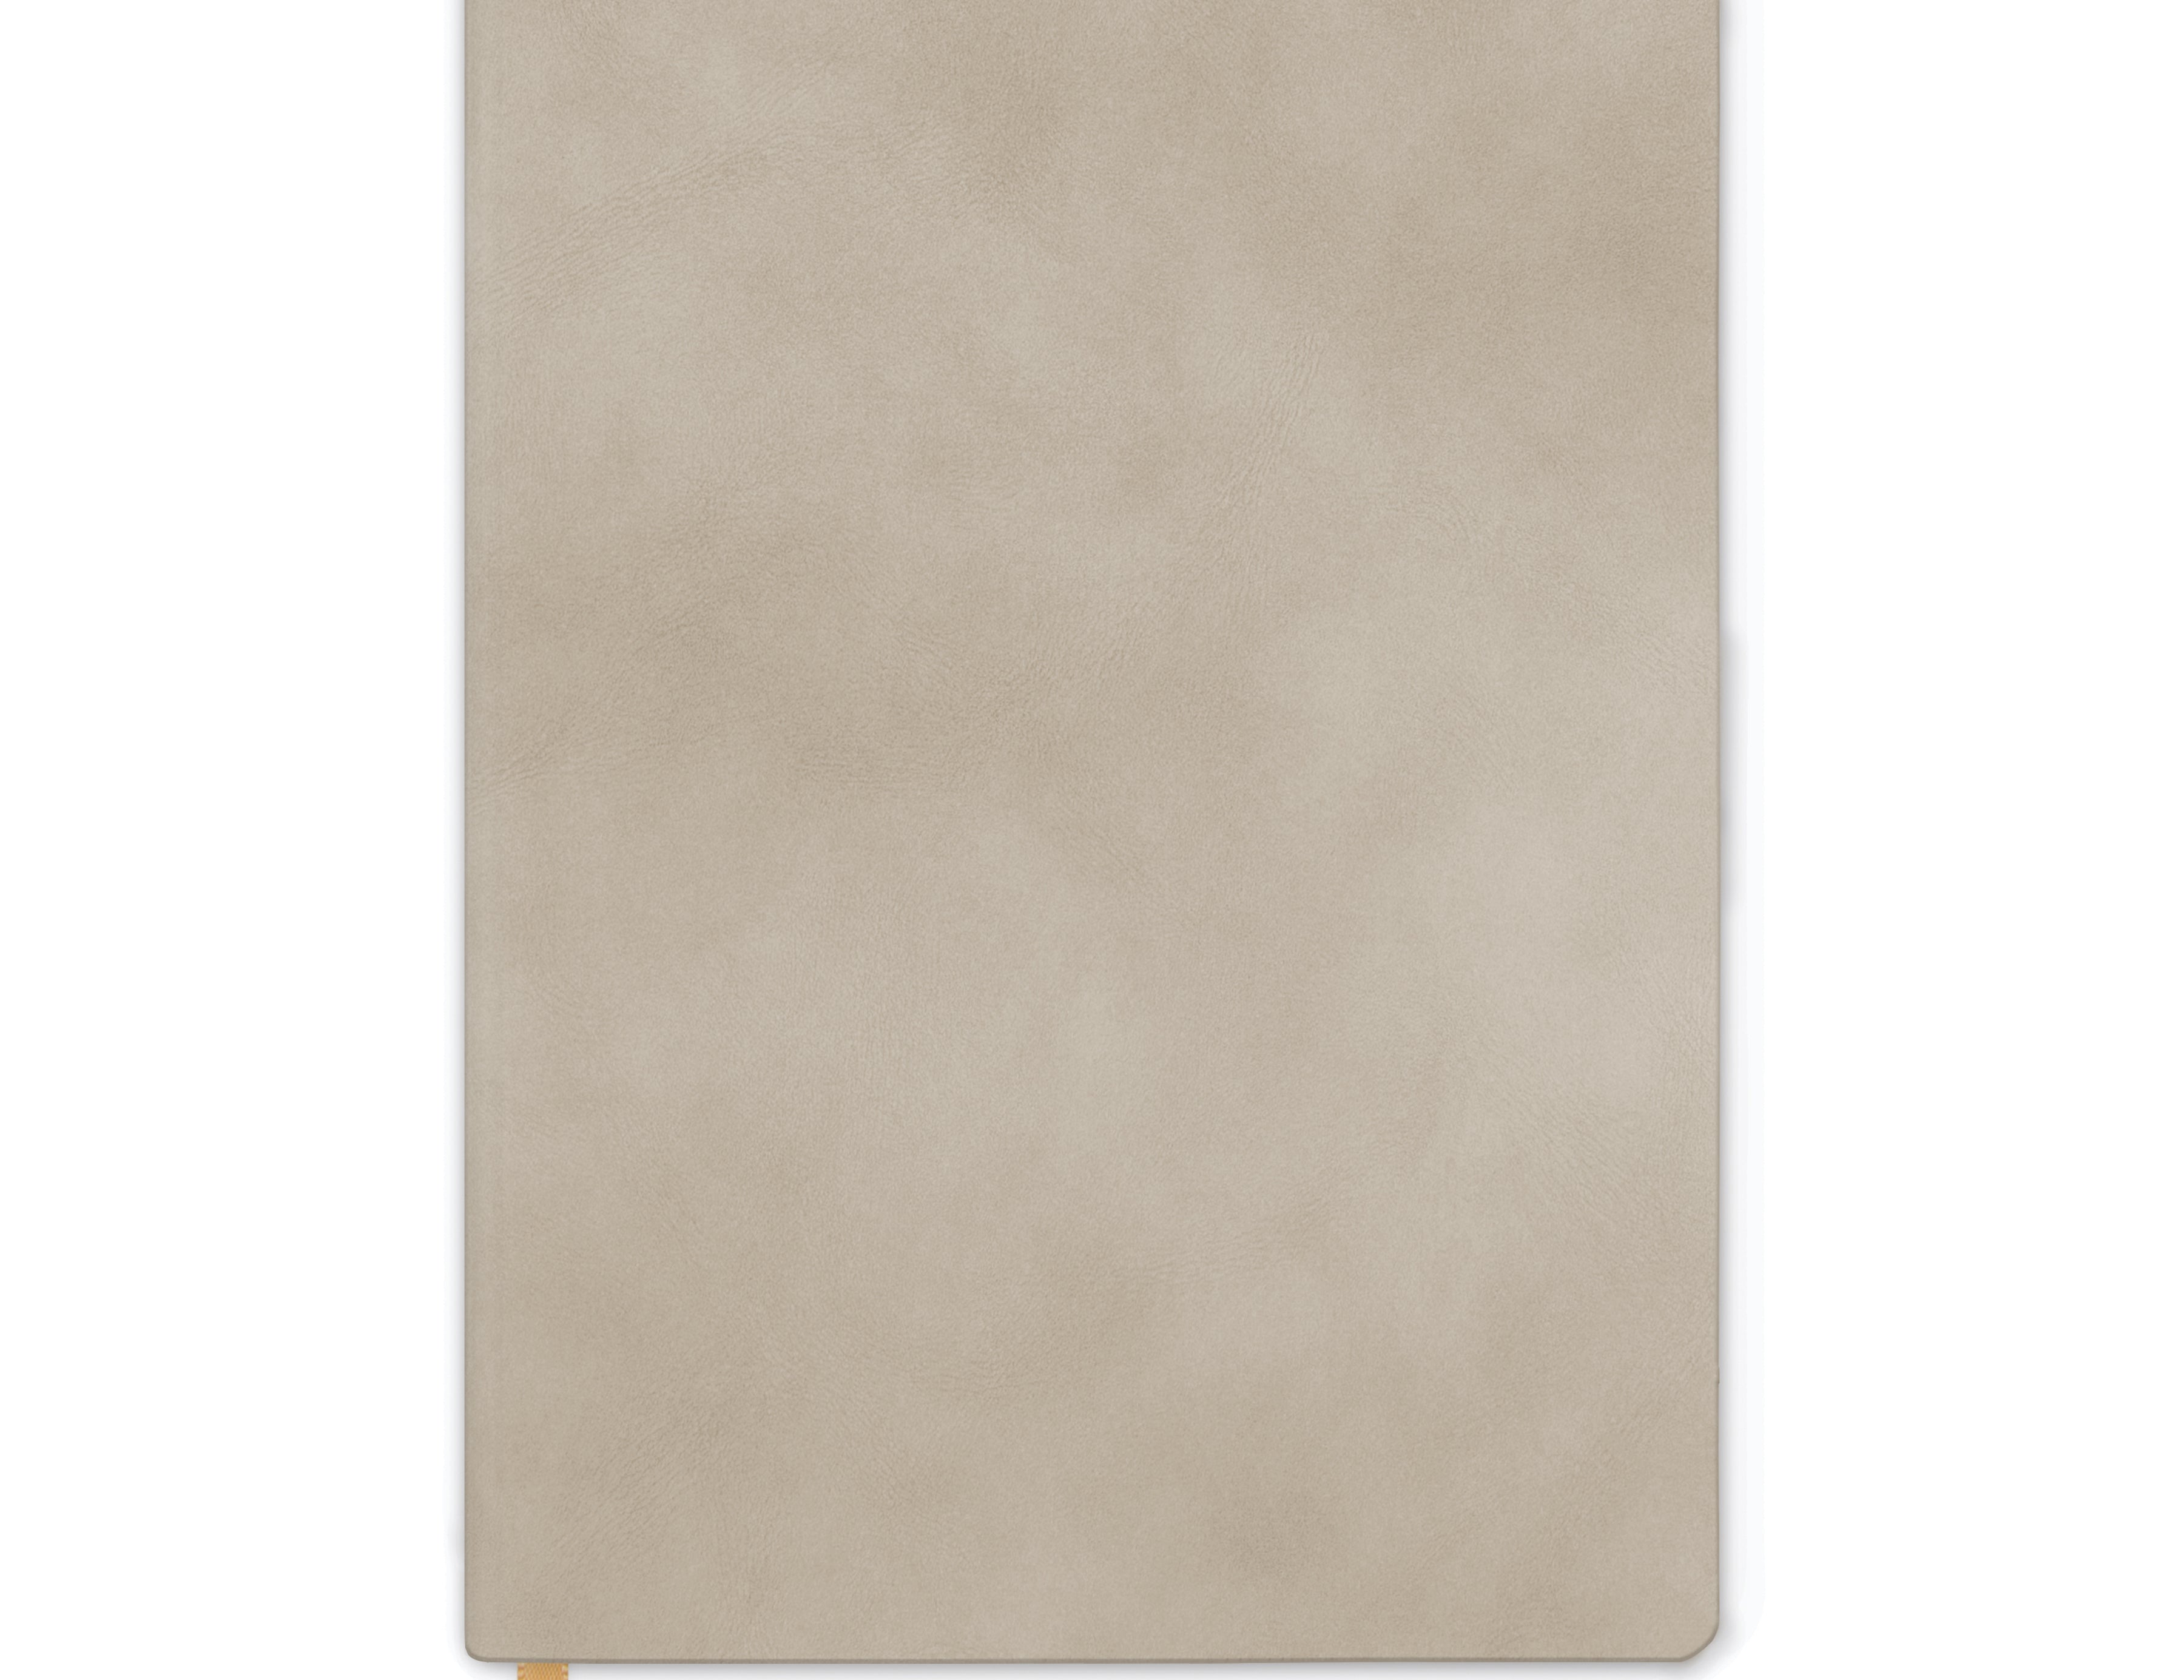 Soft Mushroom Vegan Suede Journal with 192 lined pages and ribbon bookmark. White background. 